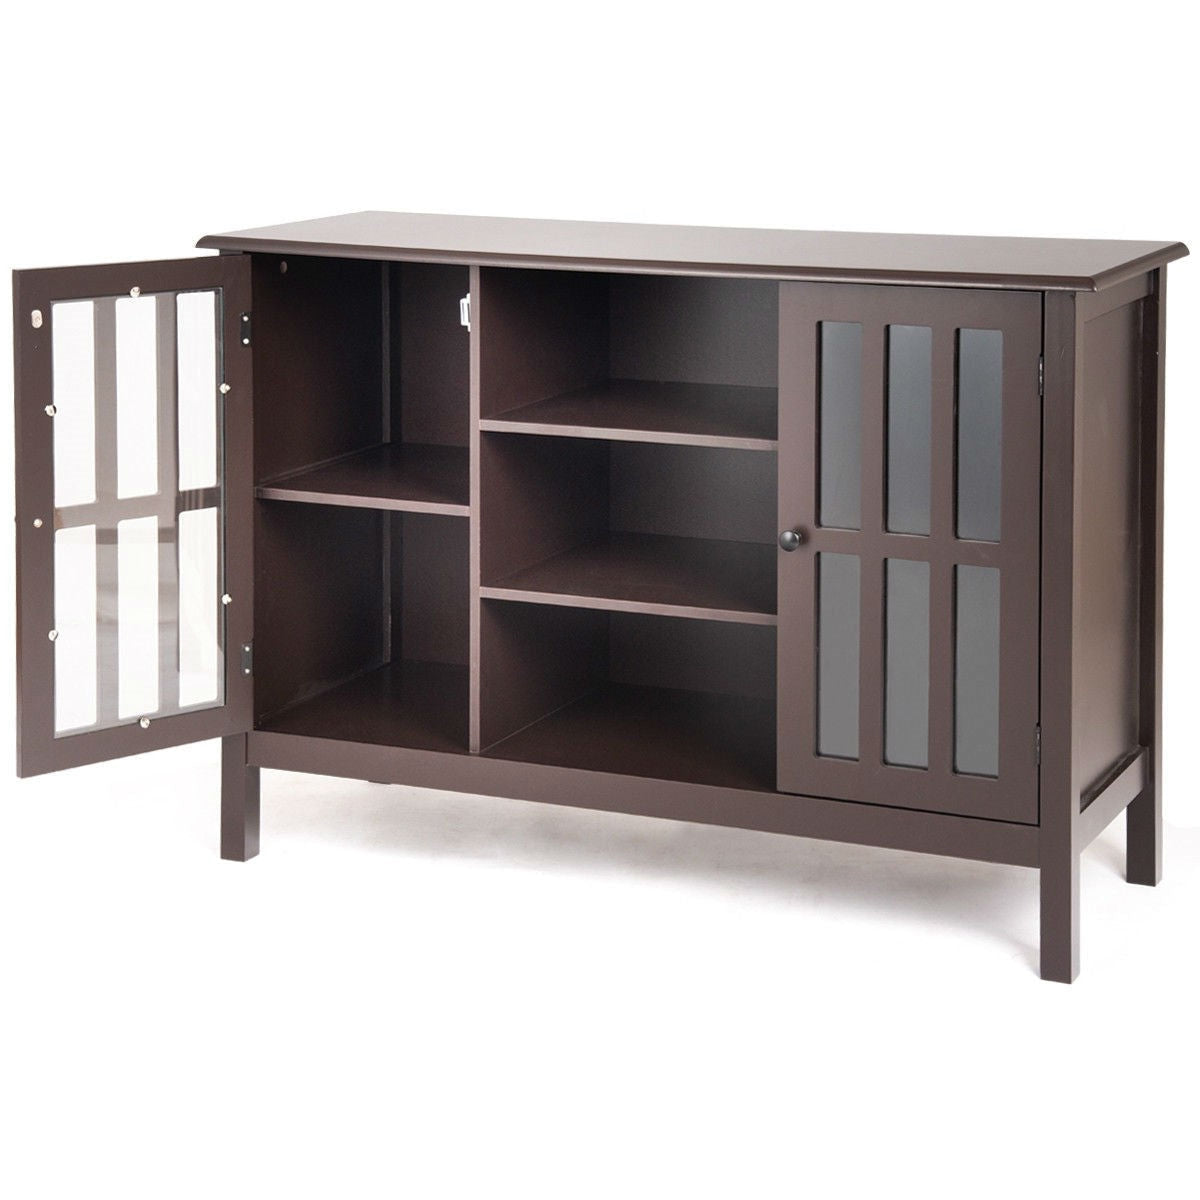 Living Room > Console & Sofa Tables - Brown Wood Sofa Tale Console Cabinet With Tempered Glass Panel Doors